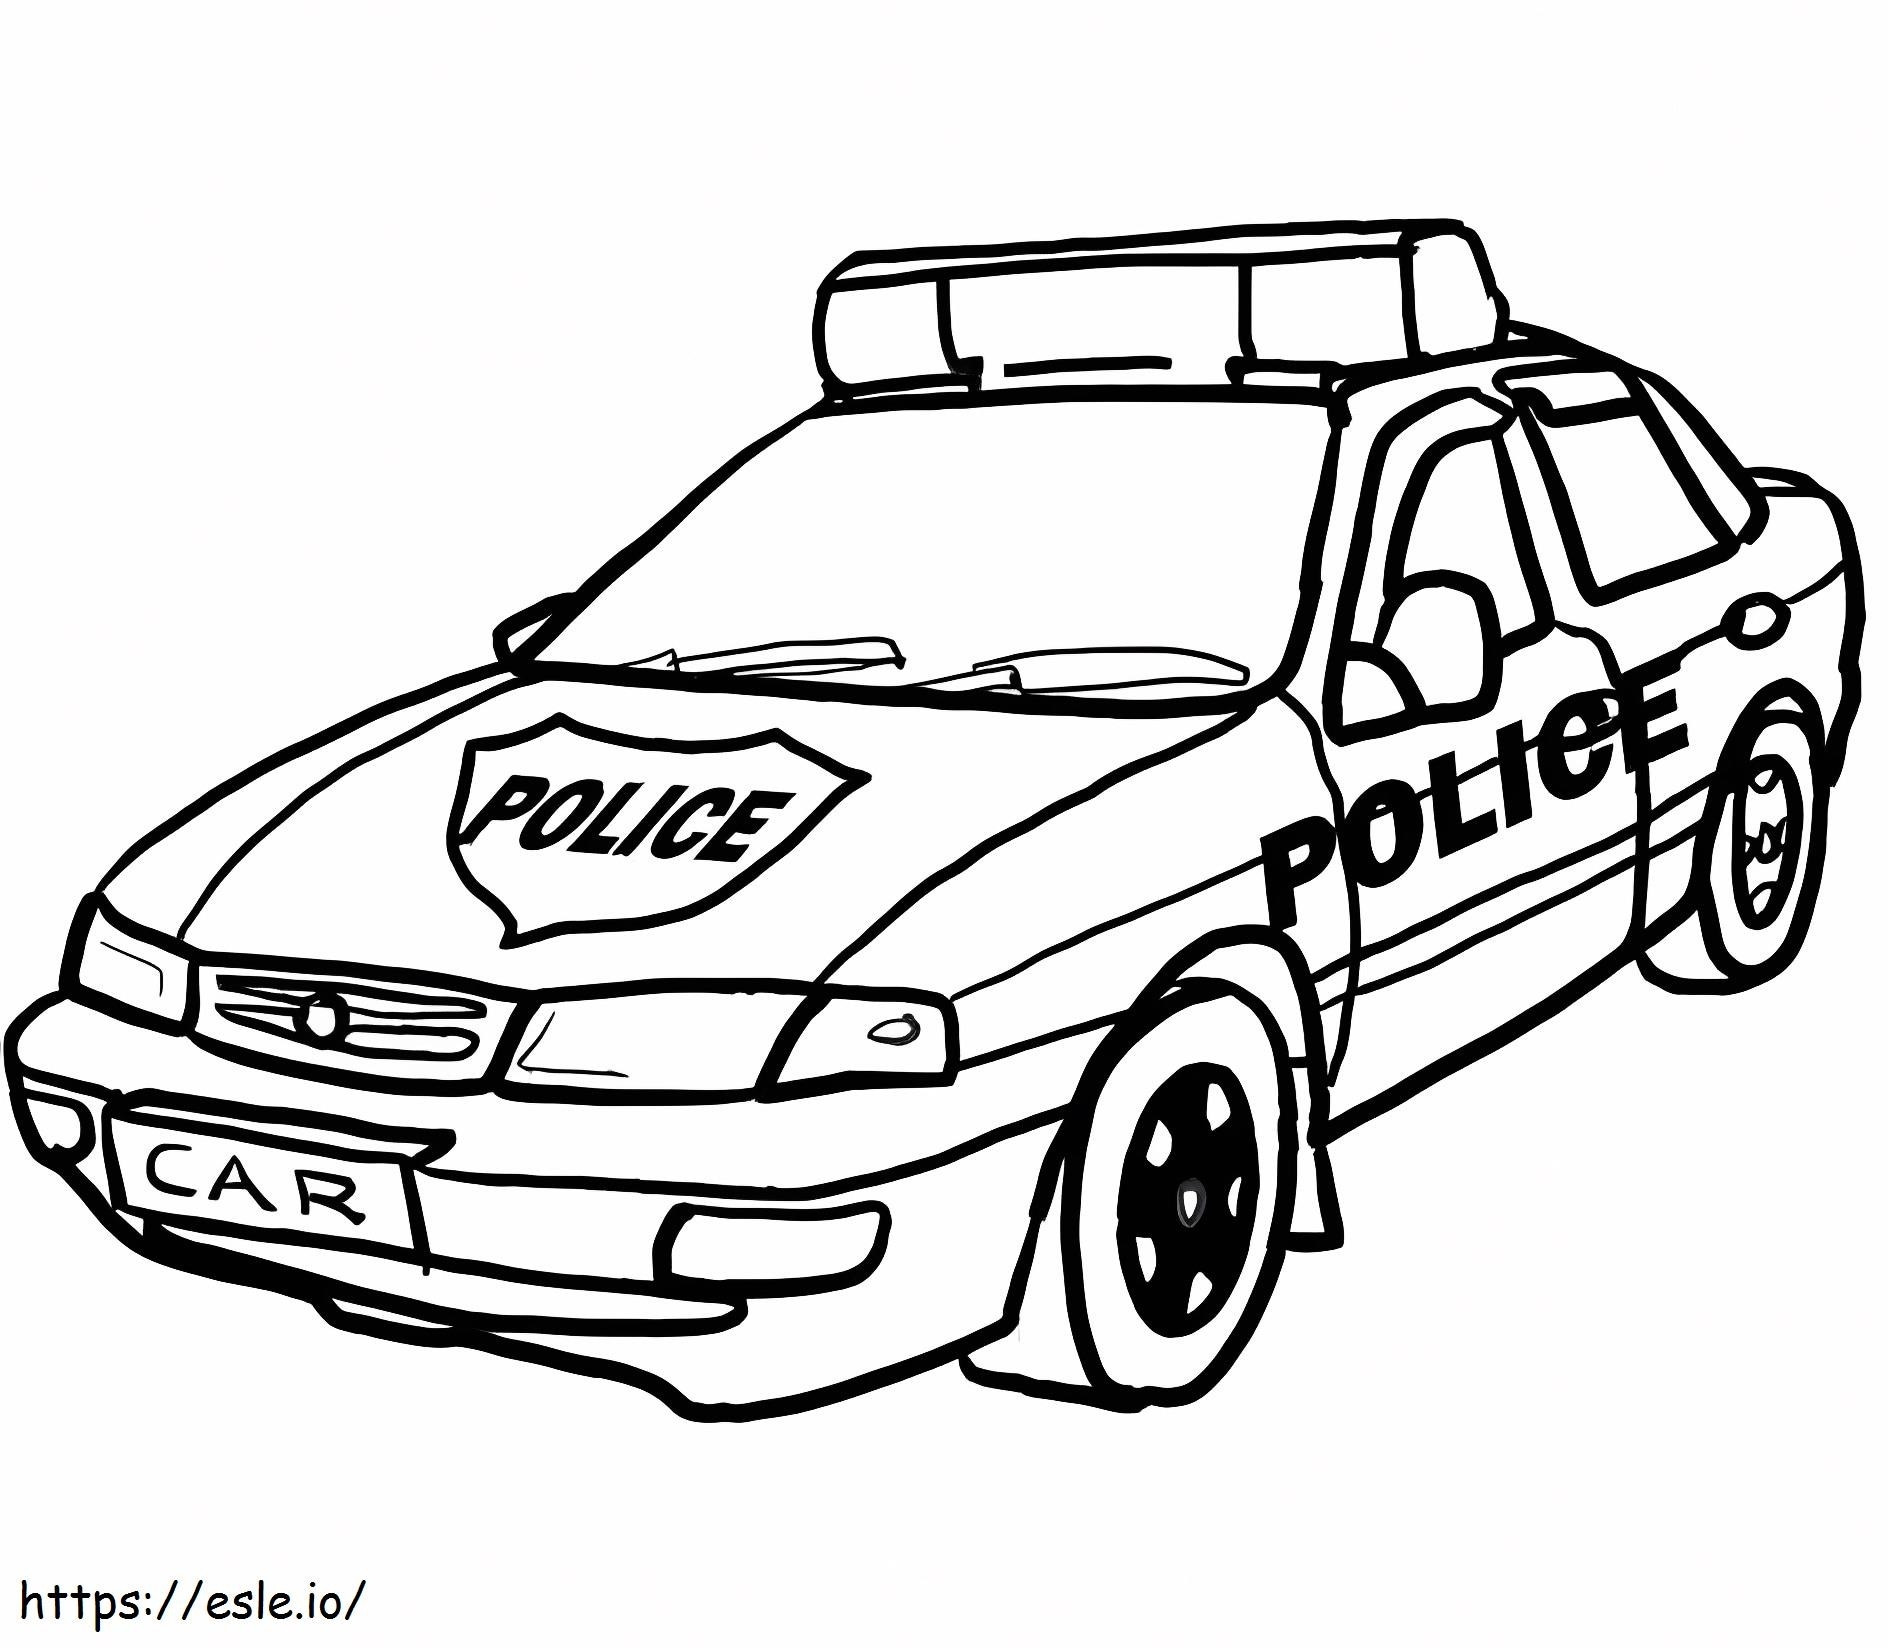 Police Car To Print coloring page